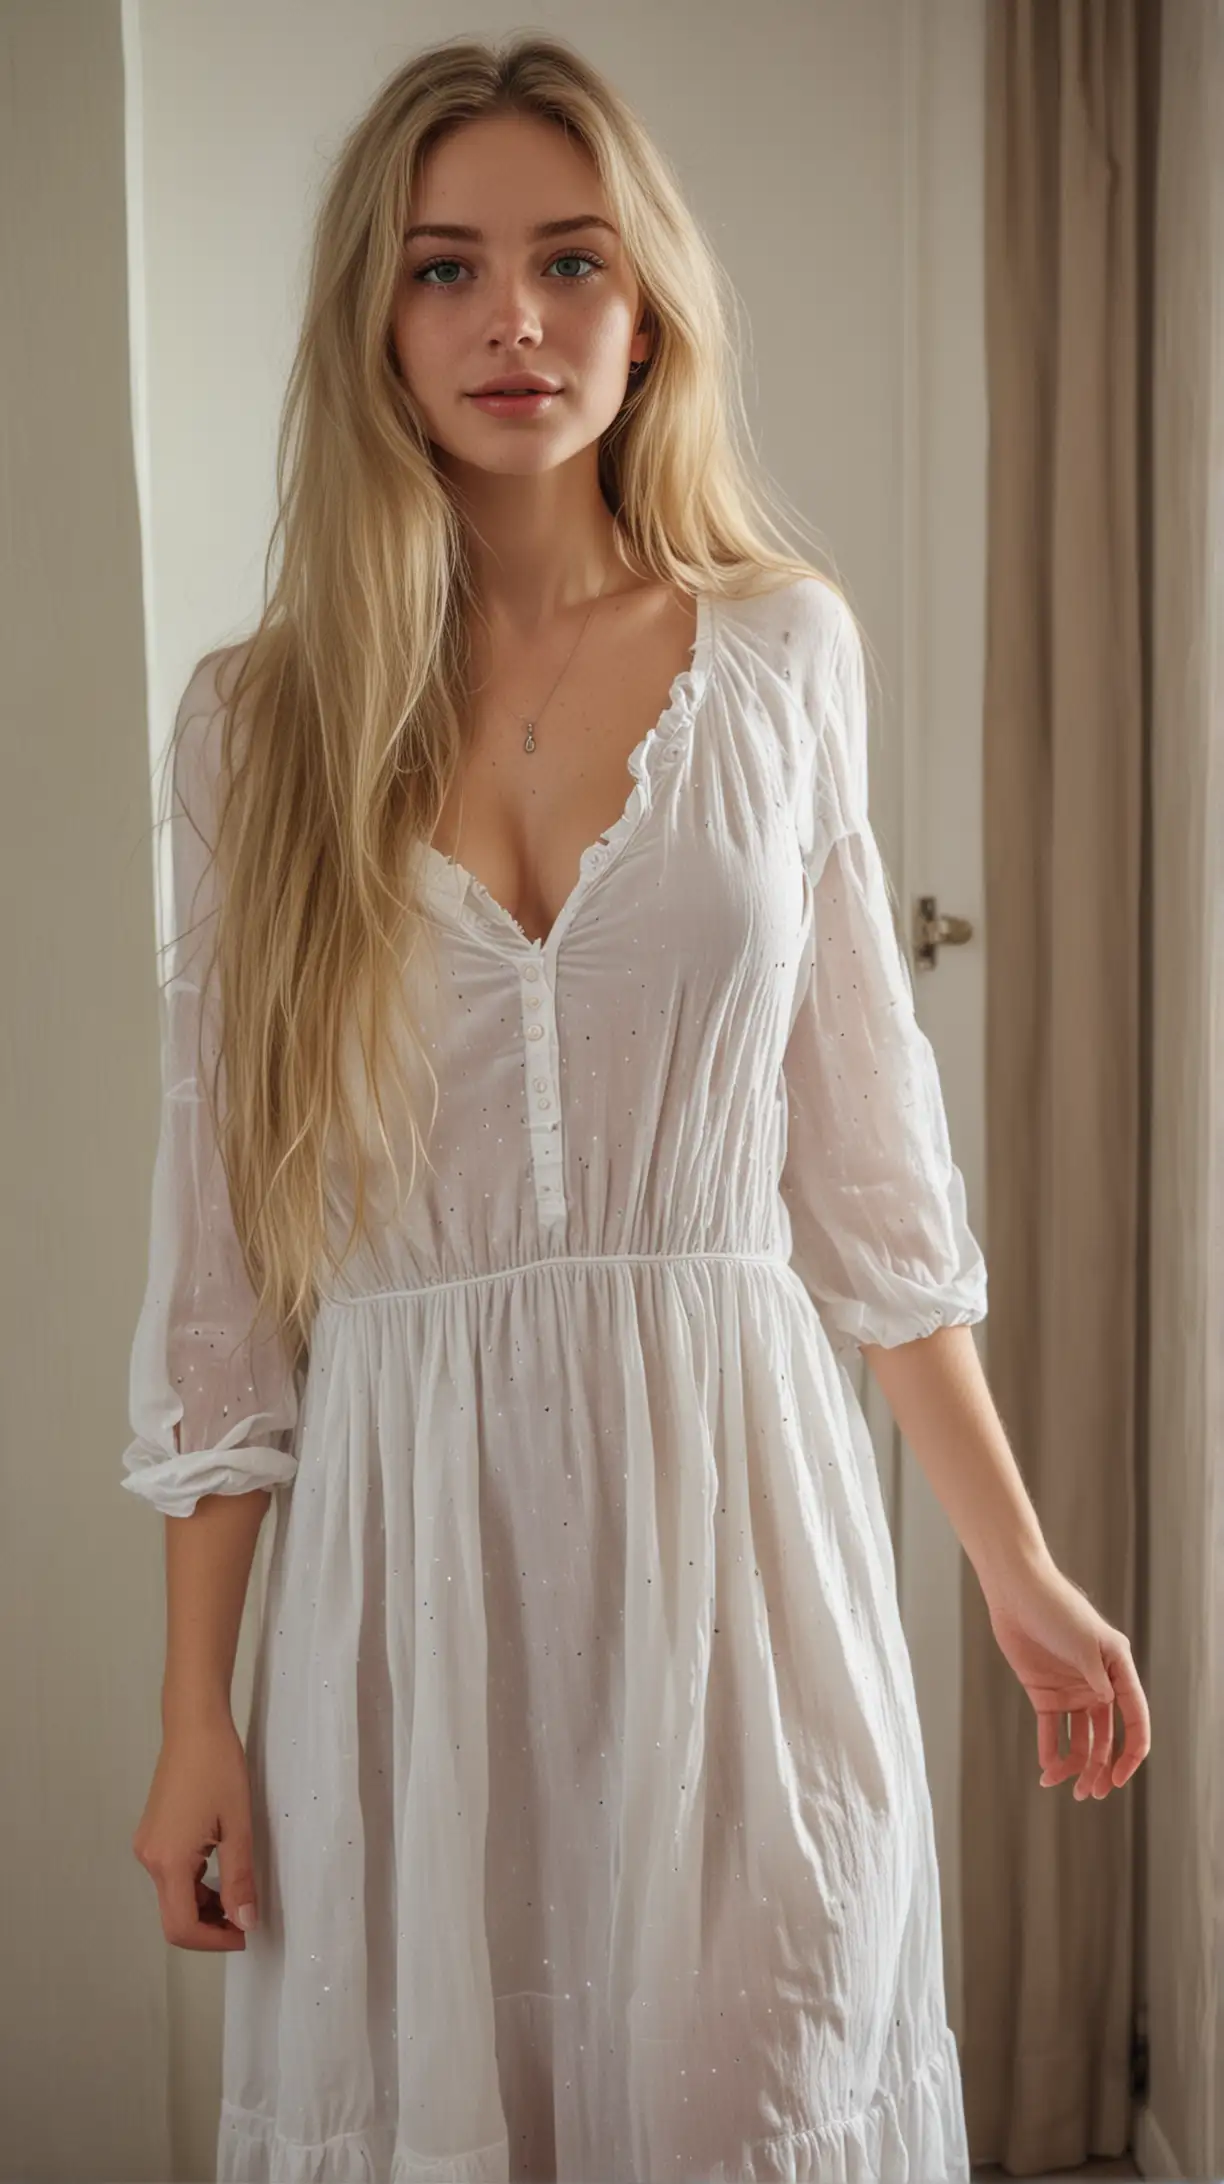 Elegant Blonde Woman in White Dress with Pendant Necklace